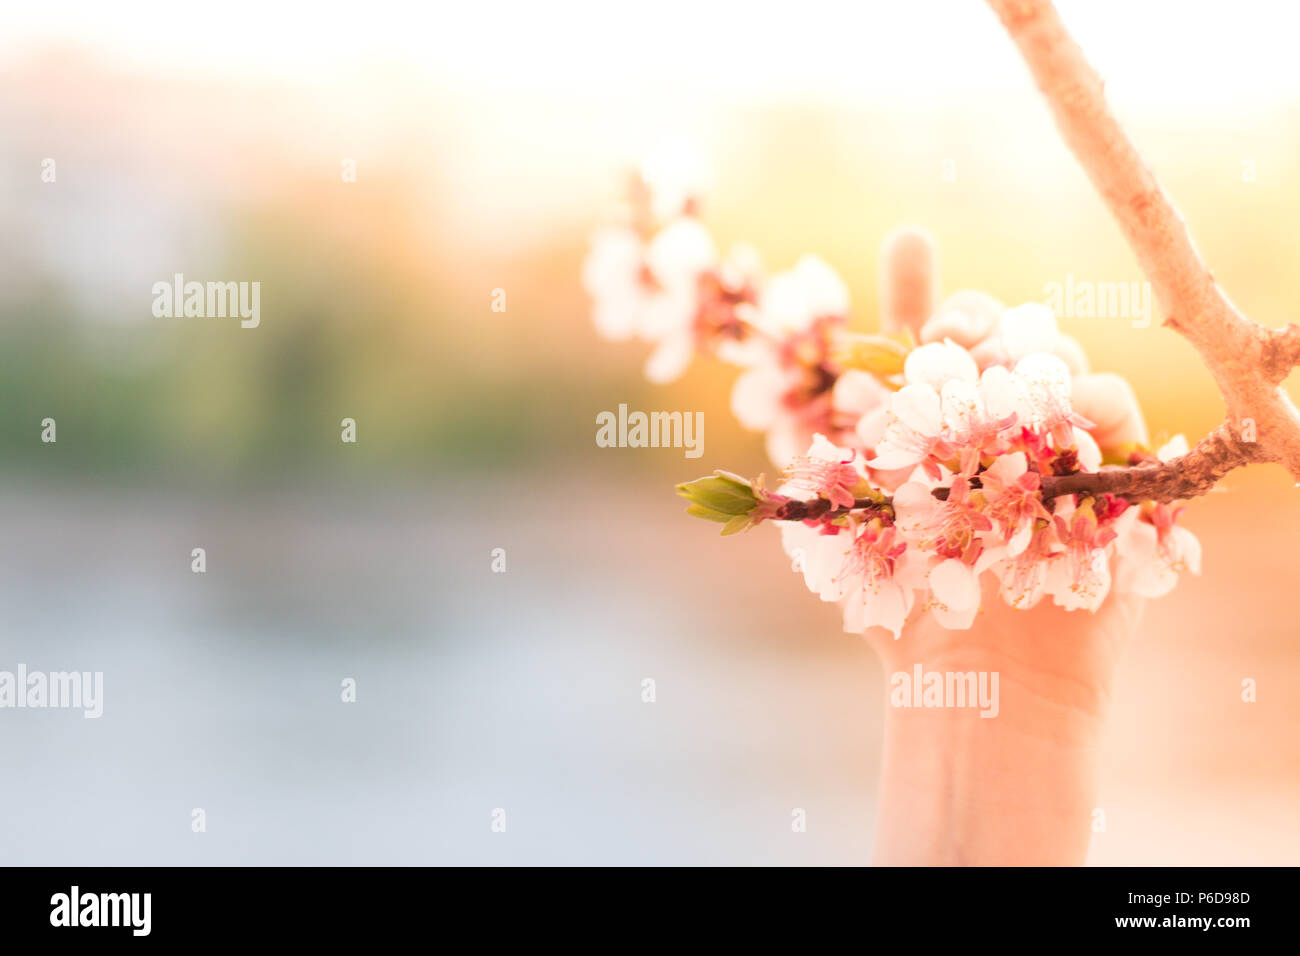 Hold on Spring. Blooming fruit apple cherry white pink blossom tree branch in kid's small hand. Copyspace. Blurred nature background Stock Photo